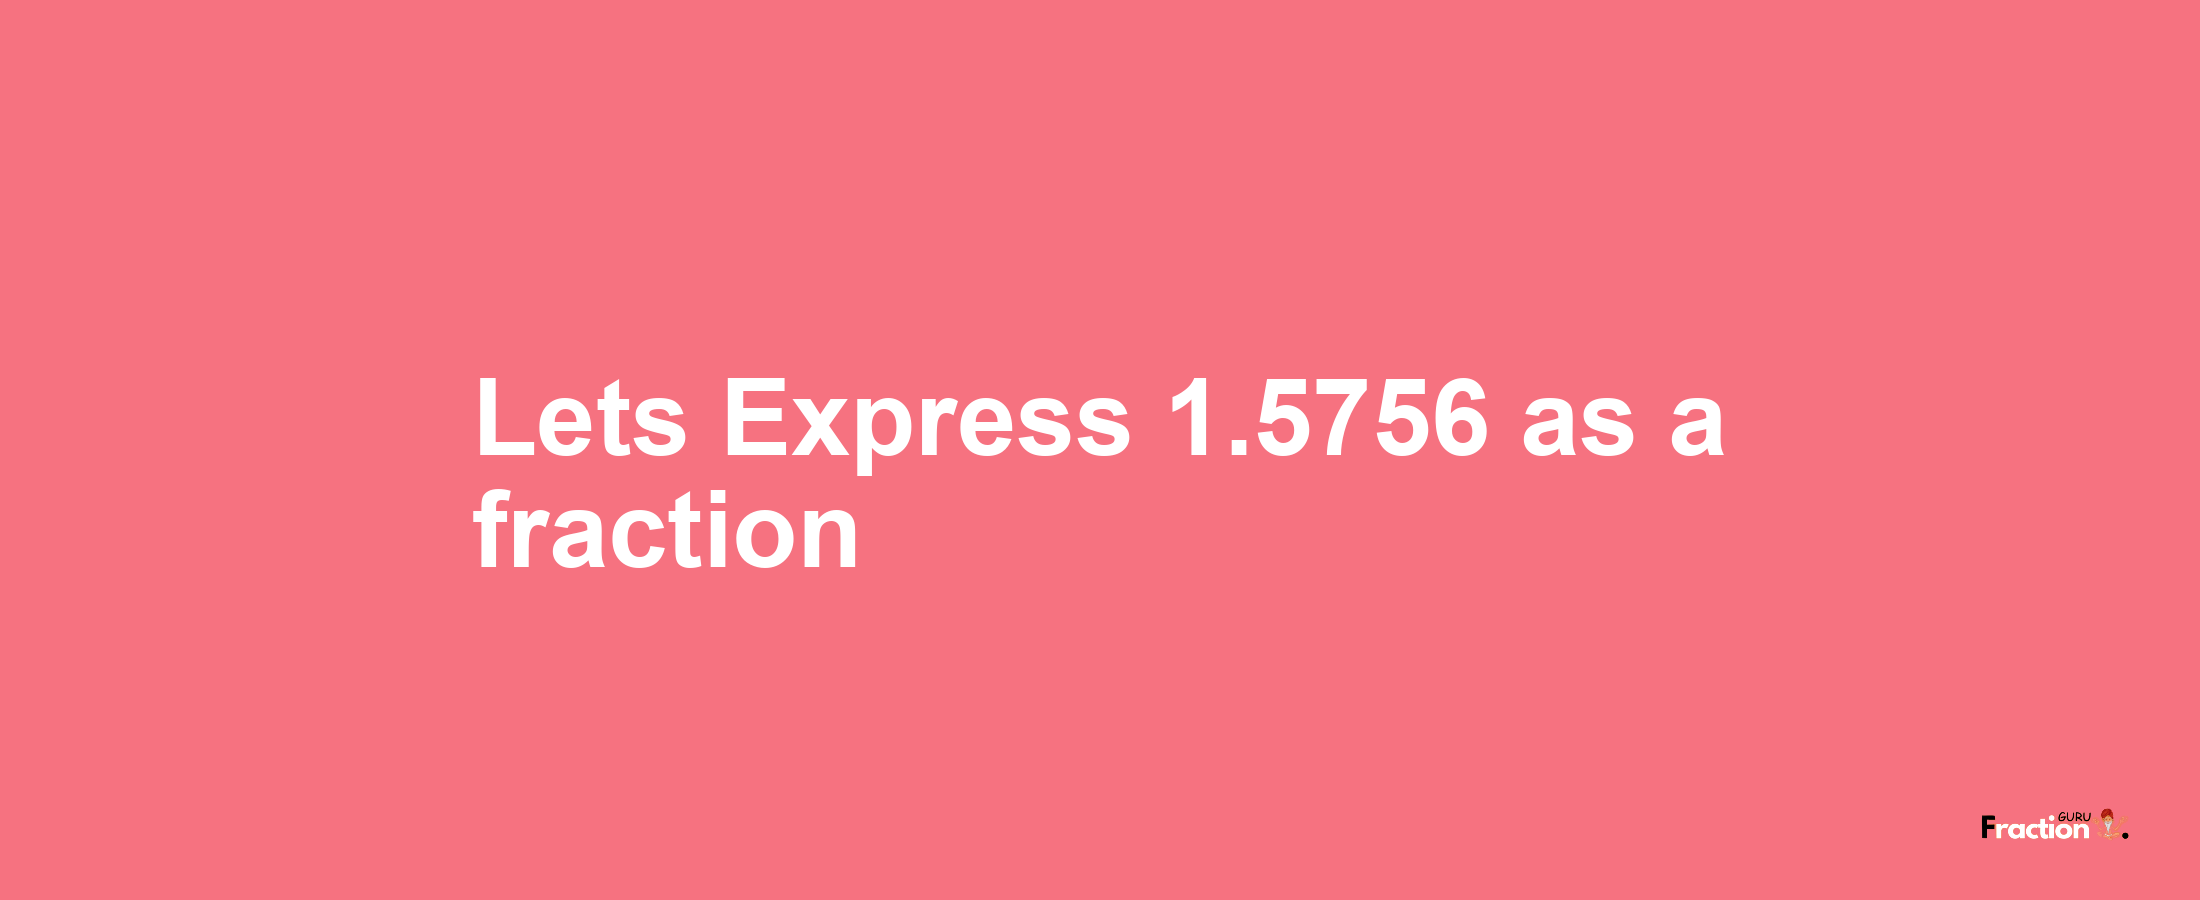 Lets Express 1.5756 as afraction